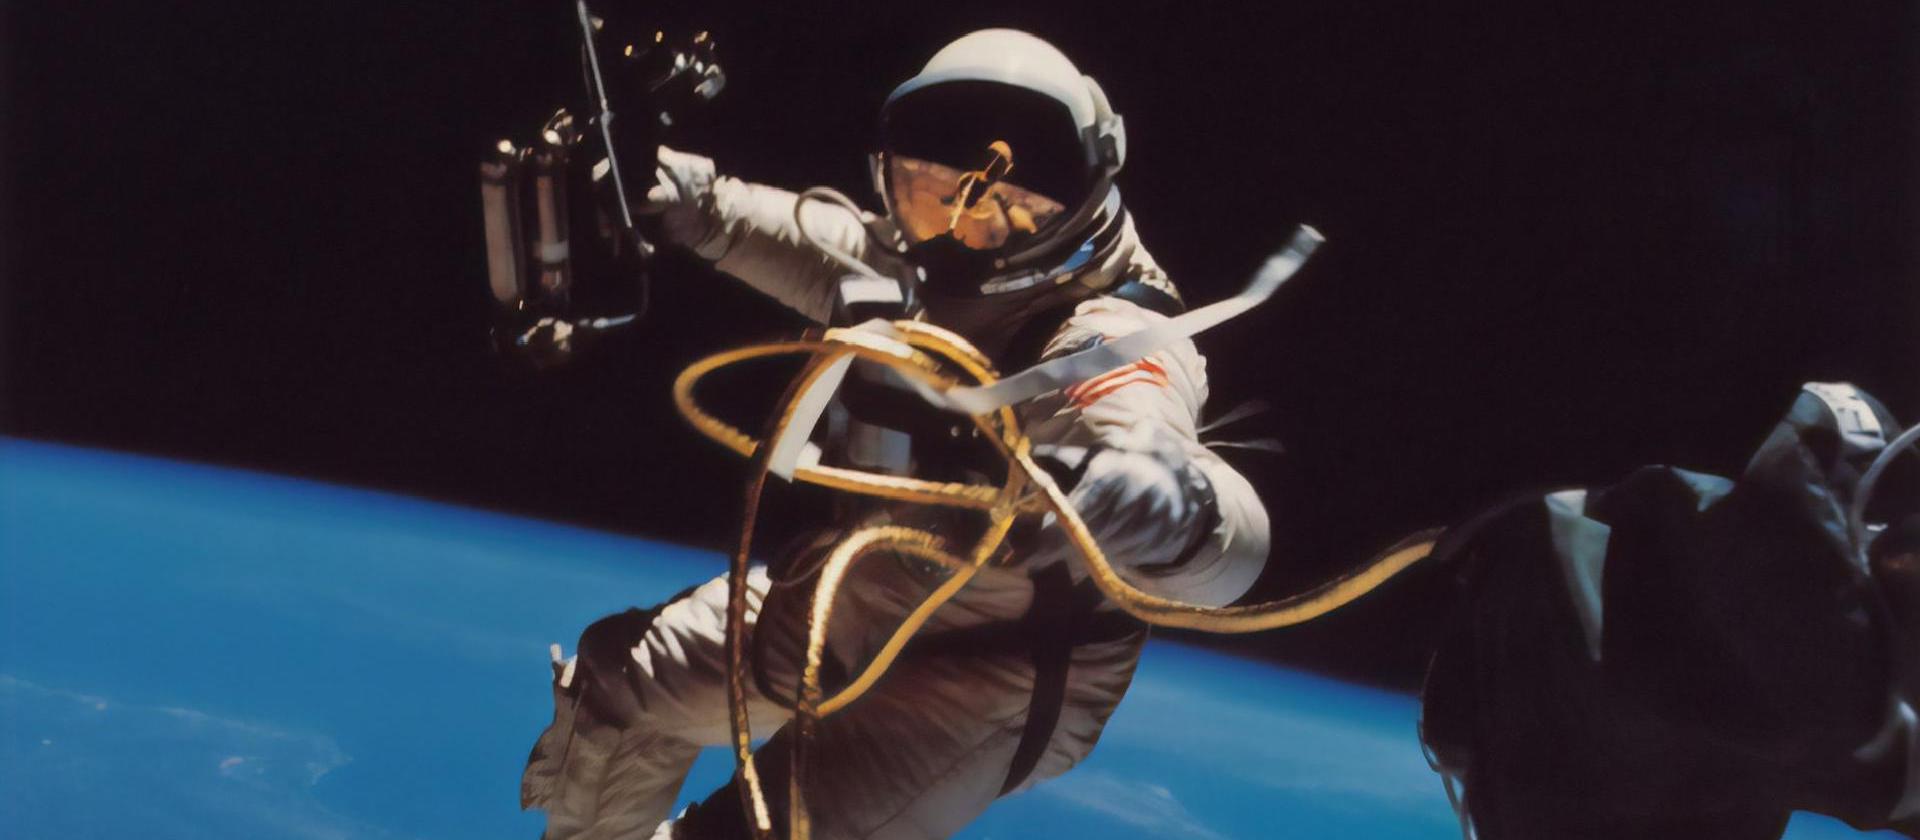 Image of a astronaut doing a space walk and what appears to be fixing things.